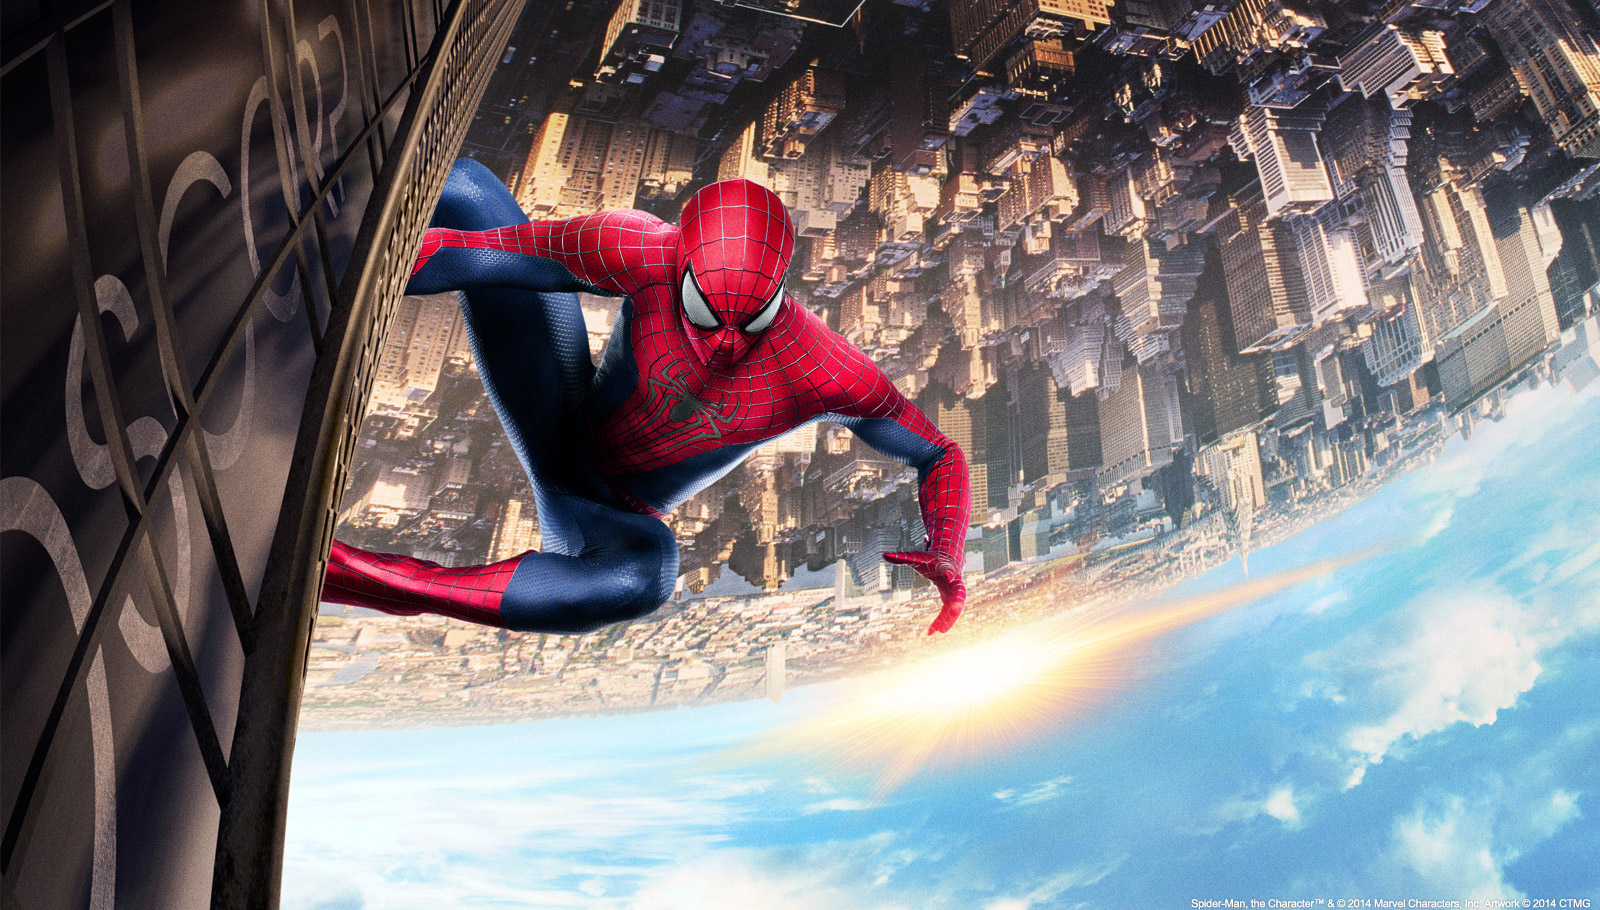  man 2 wallpapers hd collection the amazing spider man 2 wallpaper hd